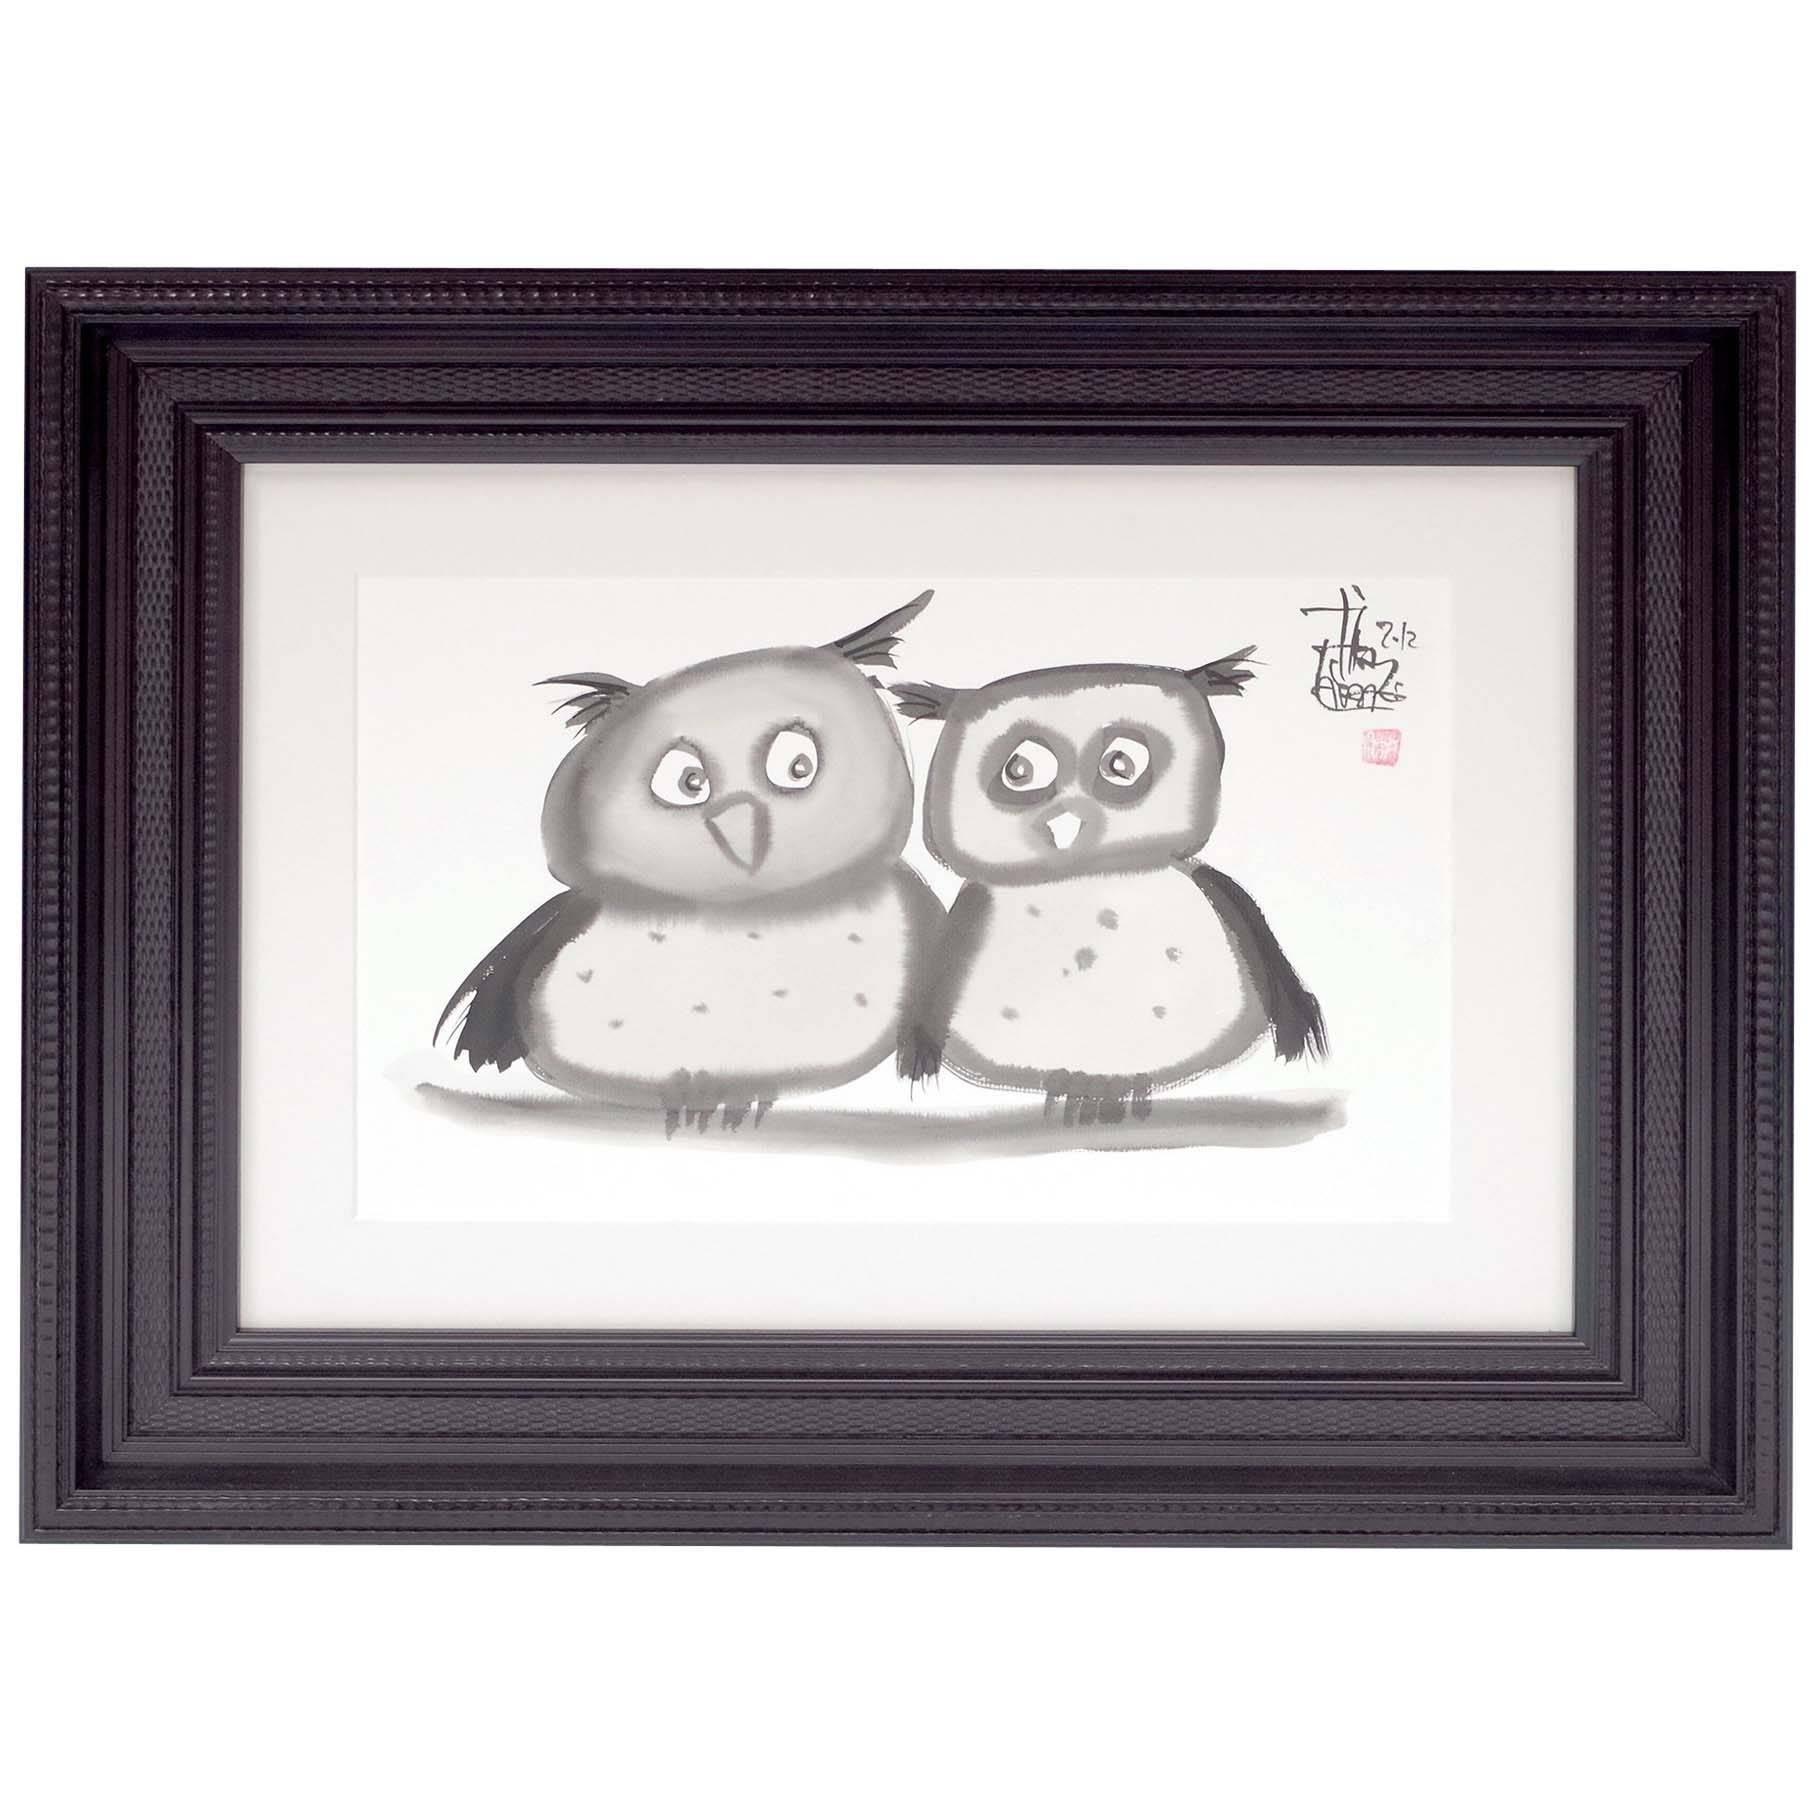 Indian Ink Wash of a Pair of Owls, Signed by Laszlo Tibay, 2012 For Sale